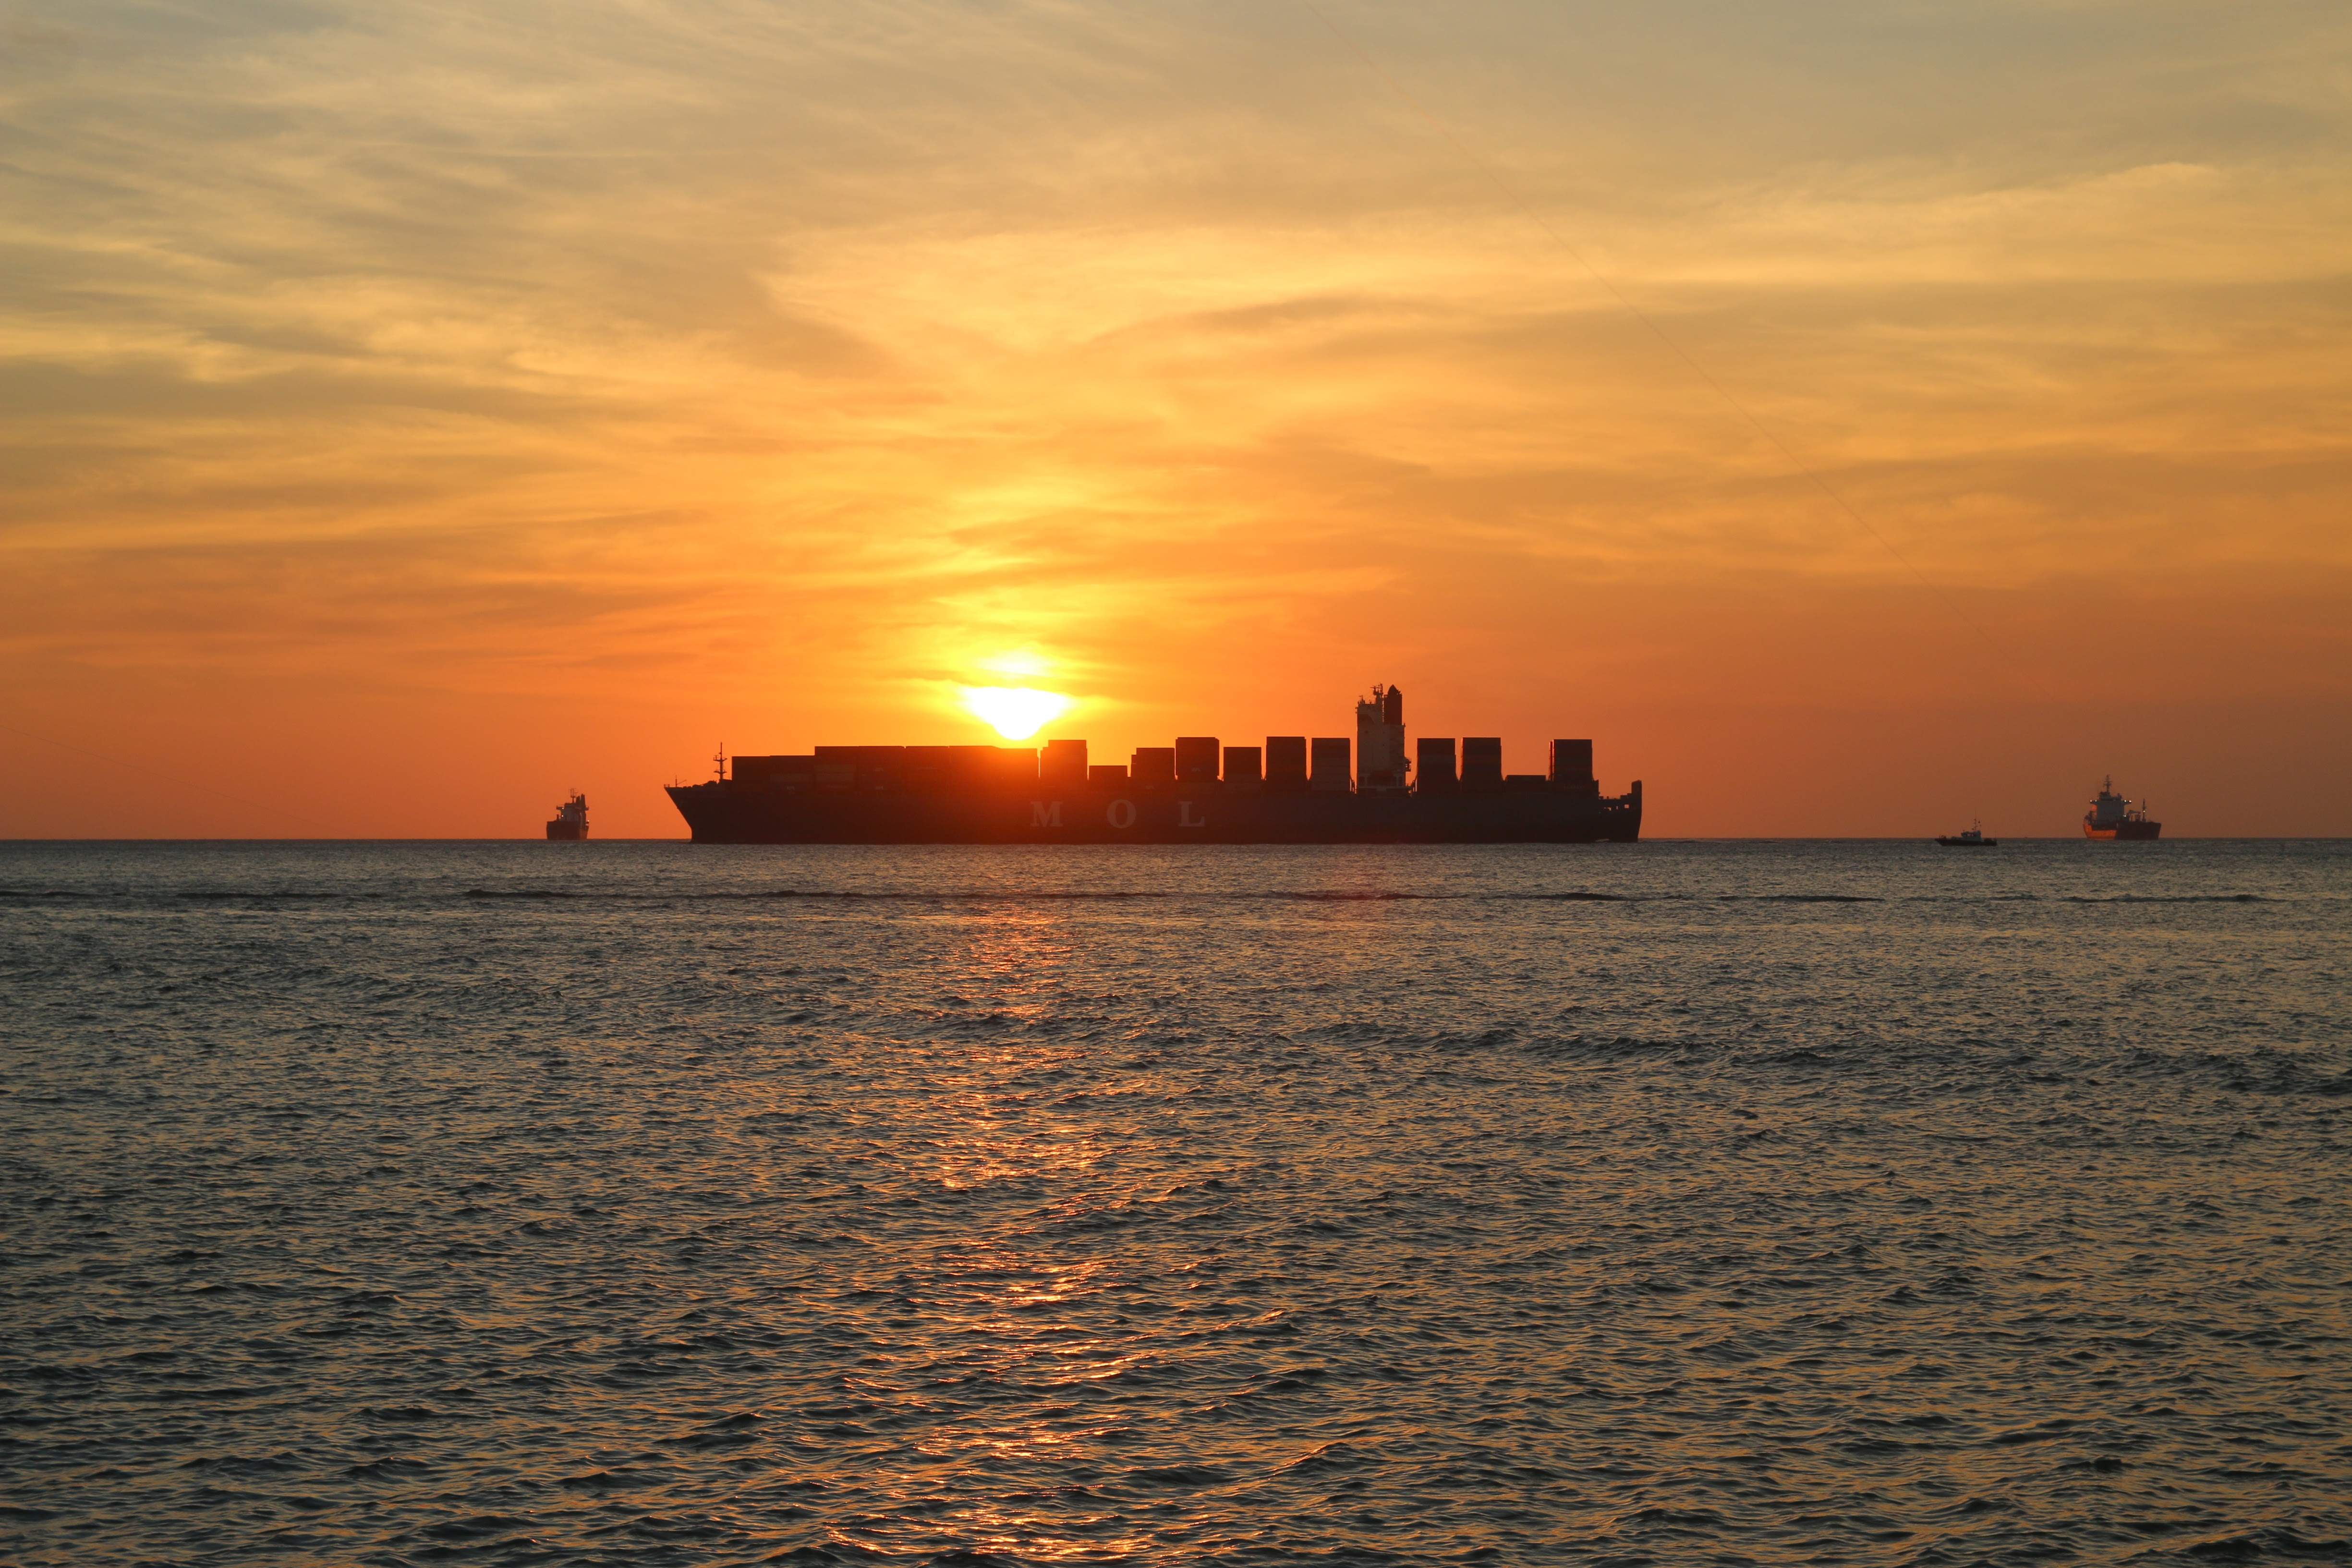 The silhouette of a container ship on the horizon at sunset